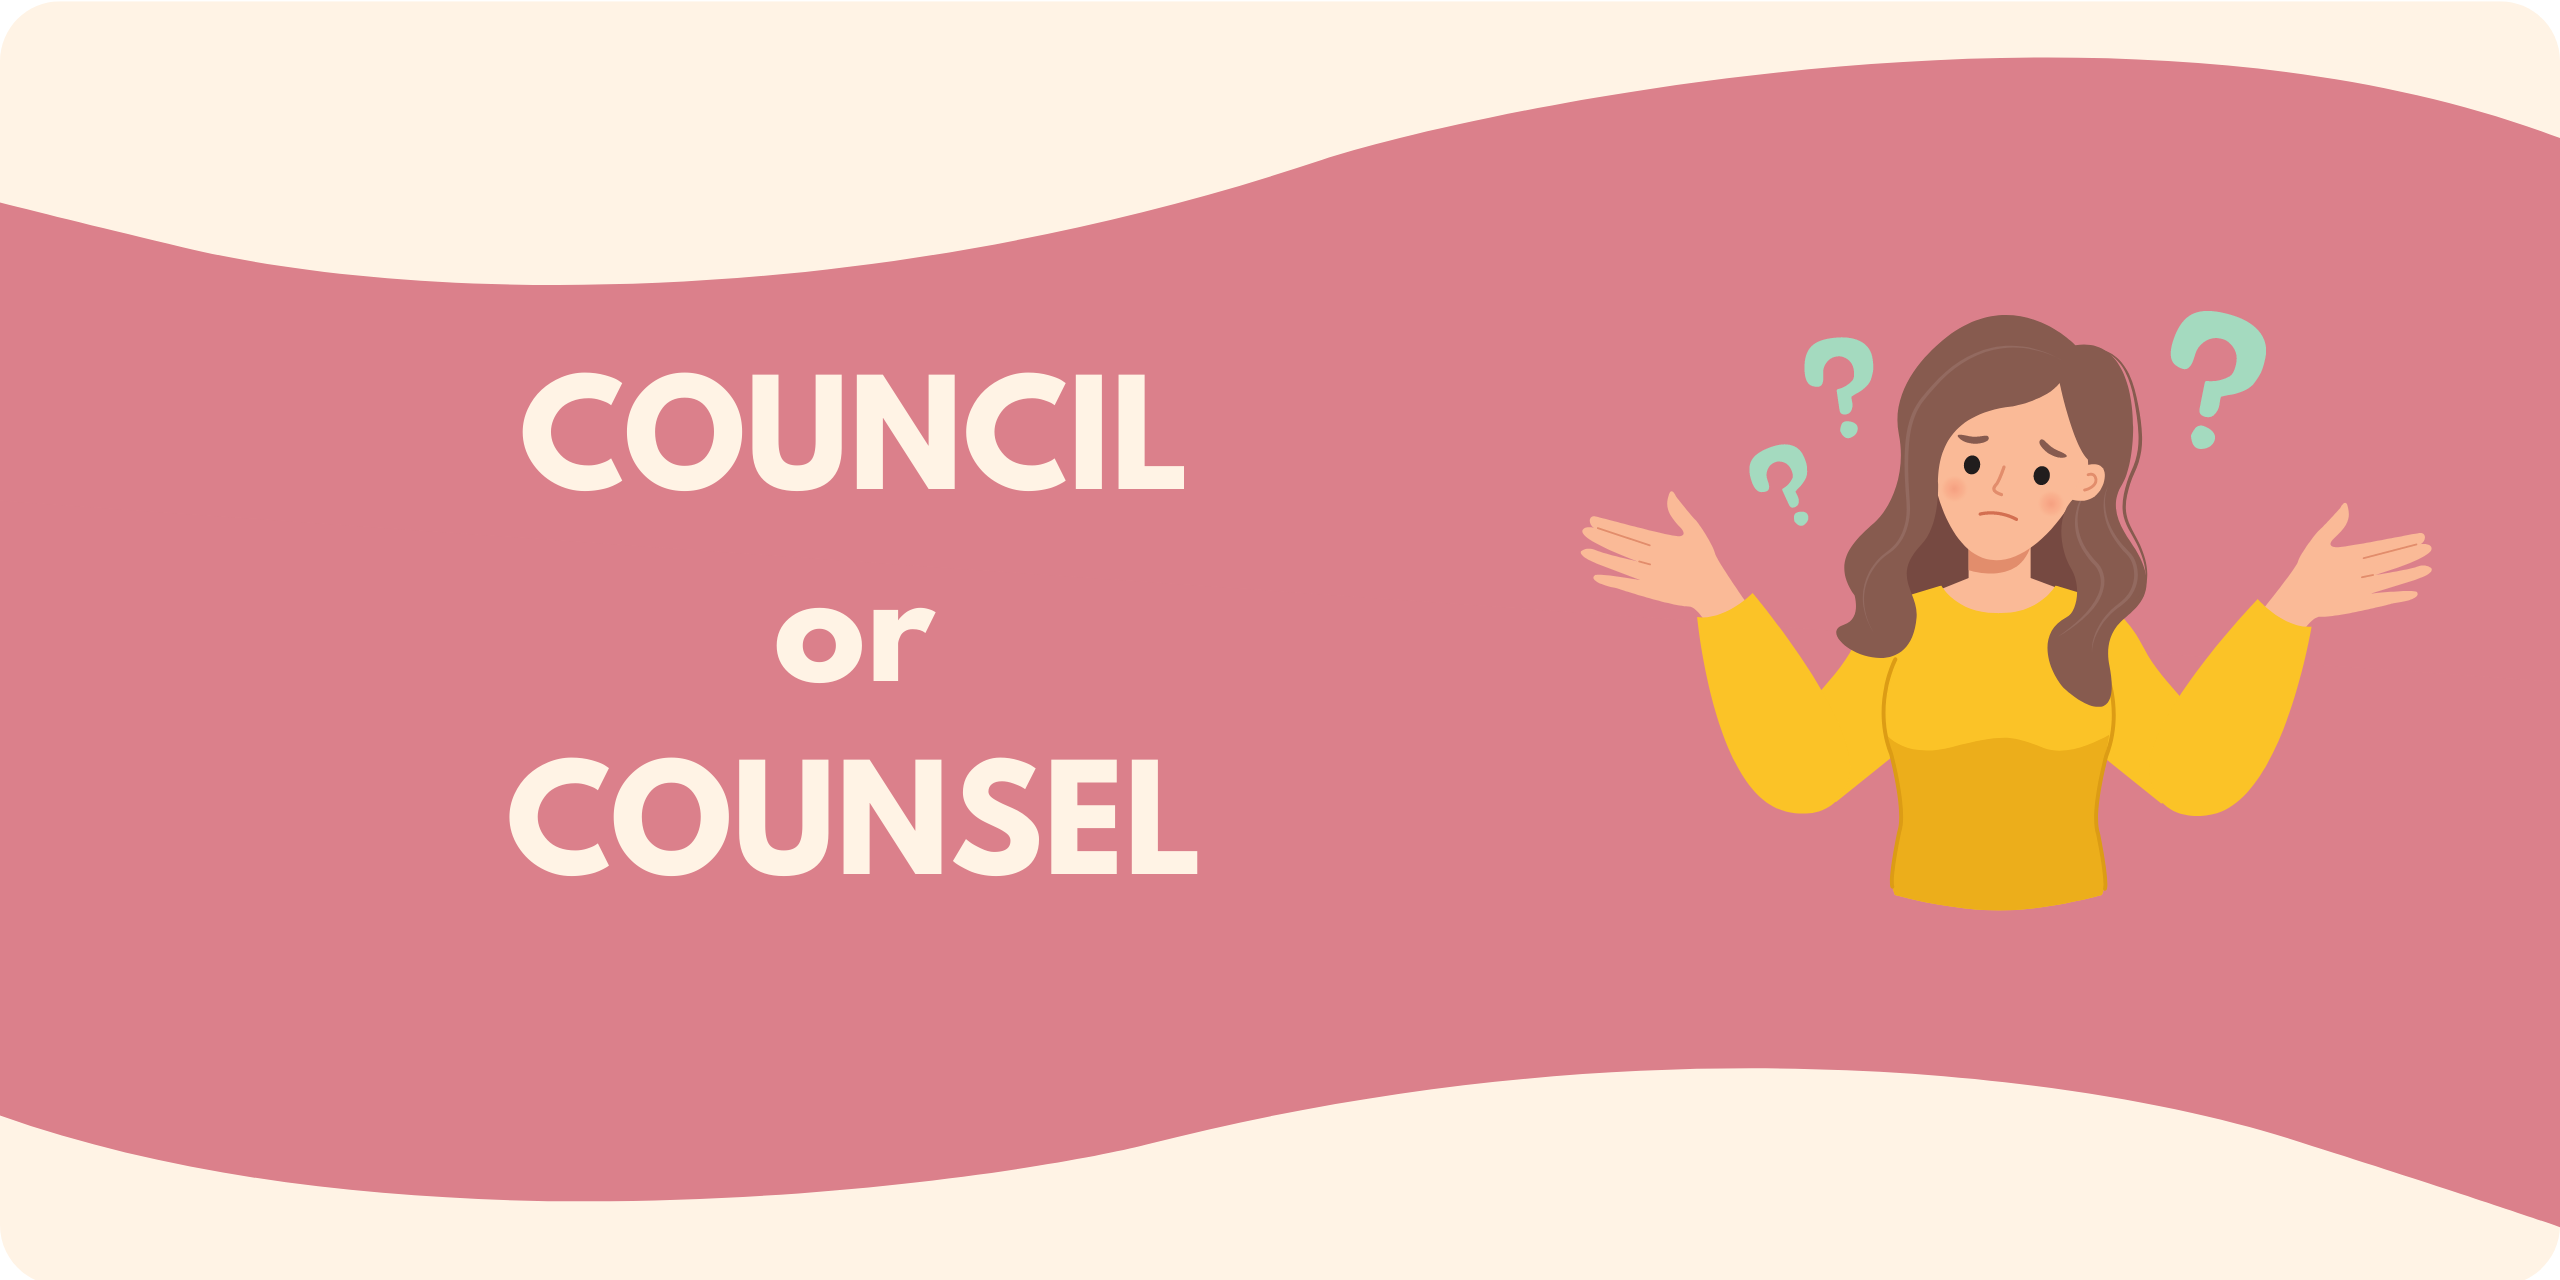 A graphic of a woman with her hands up in a quizzical pose with the words "Council or Counsel" to the left.